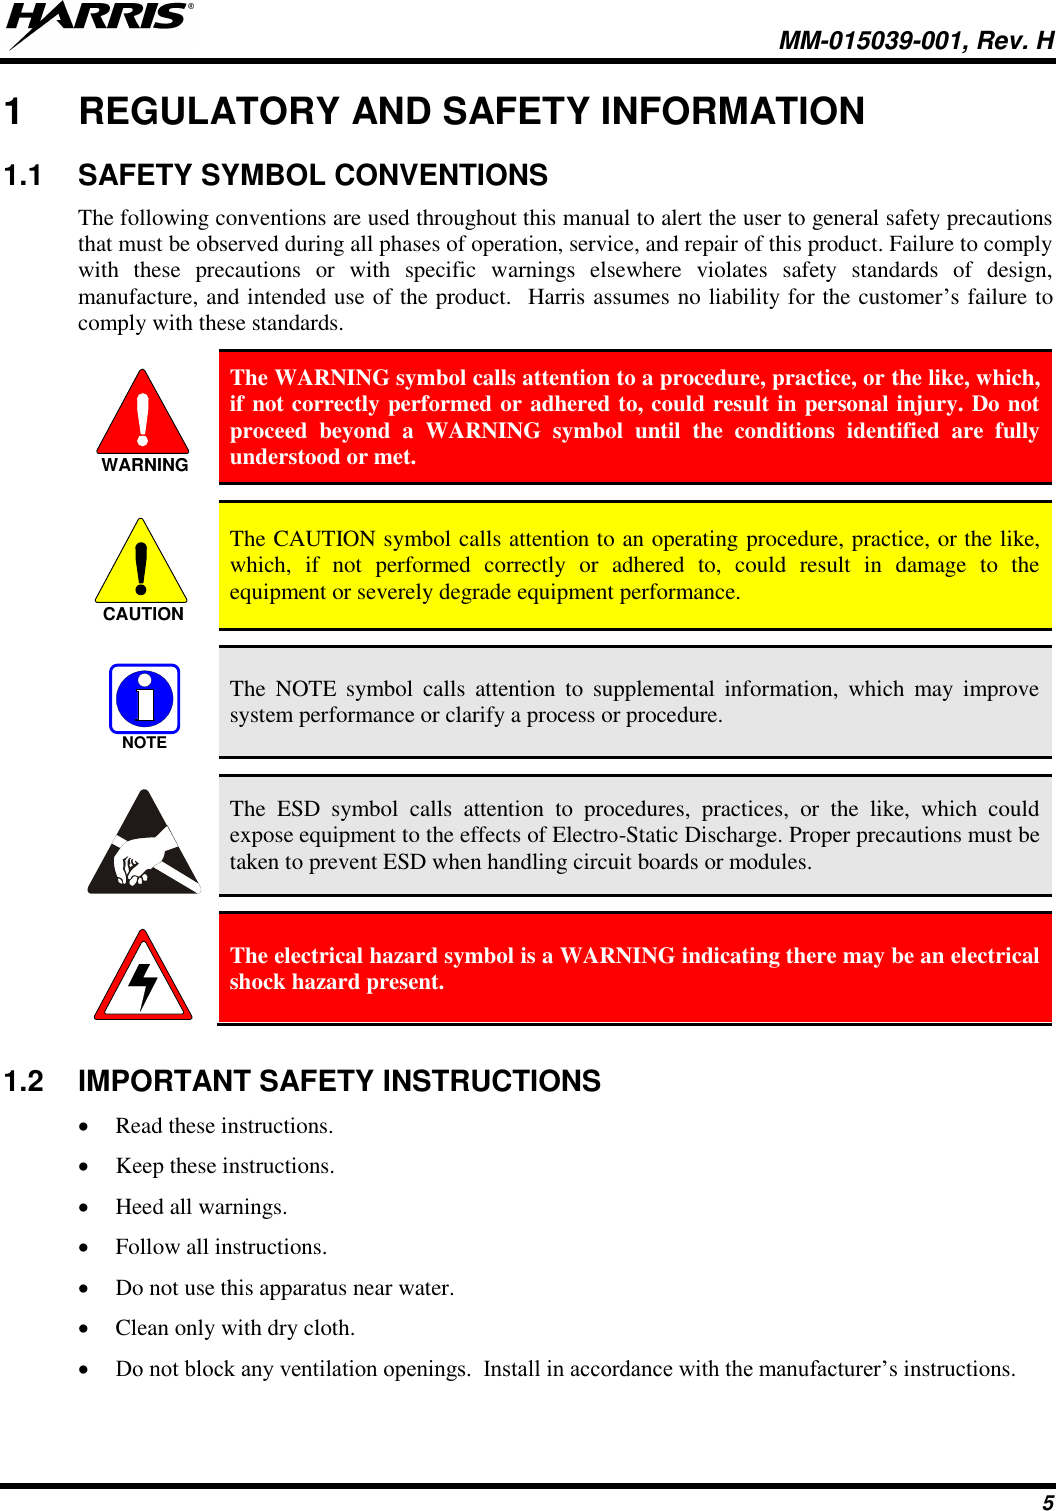   MM-015039-001, Rev. H 5 1  REGULATORY AND SAFETY INFORMATION 1.1  SAFETY SYMBOL CONVENTIONS The following conventions are used throughout this manual to alert the user to general safety precautions that must be observed during all phases of operation, service, and repair of this product. Failure to comply with  these  precautions  or  with  specific  warnings  elsewhere  violates  safety  standards  of  design, manufacture, and intended use of the product.  Harris assumes no liability for the customer’s failure to comply with these standards.  The WARNING symbol calls attention to a procedure, practice, or the like, which, if not correctly performed or adhered to, could result in personal injury. Do not proceed  beyond  a  WARNING  symbol  until  the  conditions  identified  are  fully understood or met.    The CAUTION symbol calls attention to an operating procedure, practice, or the like, which,  if  not  performed  correctly  or  adhered  to,  could  result  in  damage  to  the equipment or severely degrade equipment performance.    The  NOTE  symbol  calls  attention  to  supplemental  information,  which  may  improve system performance or clarify a process or procedure.    The  ESD  symbol  calls  attention  to  procedures,  practices,  or  the  like,  which  could expose equipment to the effects of Electro-Static Discharge. Proper precautions must be taken to prevent ESD when handling circuit boards or modules.    The electrical hazard symbol is a WARNING indicating there may be an electrical shock hazard present.  1.2  IMPORTANT SAFETY INSTRUCTIONS  Read these instructions.  Keep these instructions.  Heed all warnings.  Follow all instructions.  Do not use this apparatus near water.  Clean only with dry cloth.  Do not block any ventilation openings.  Install in accordance with the manufacturer’s instructions. WARNINGCAUTIONNOTE